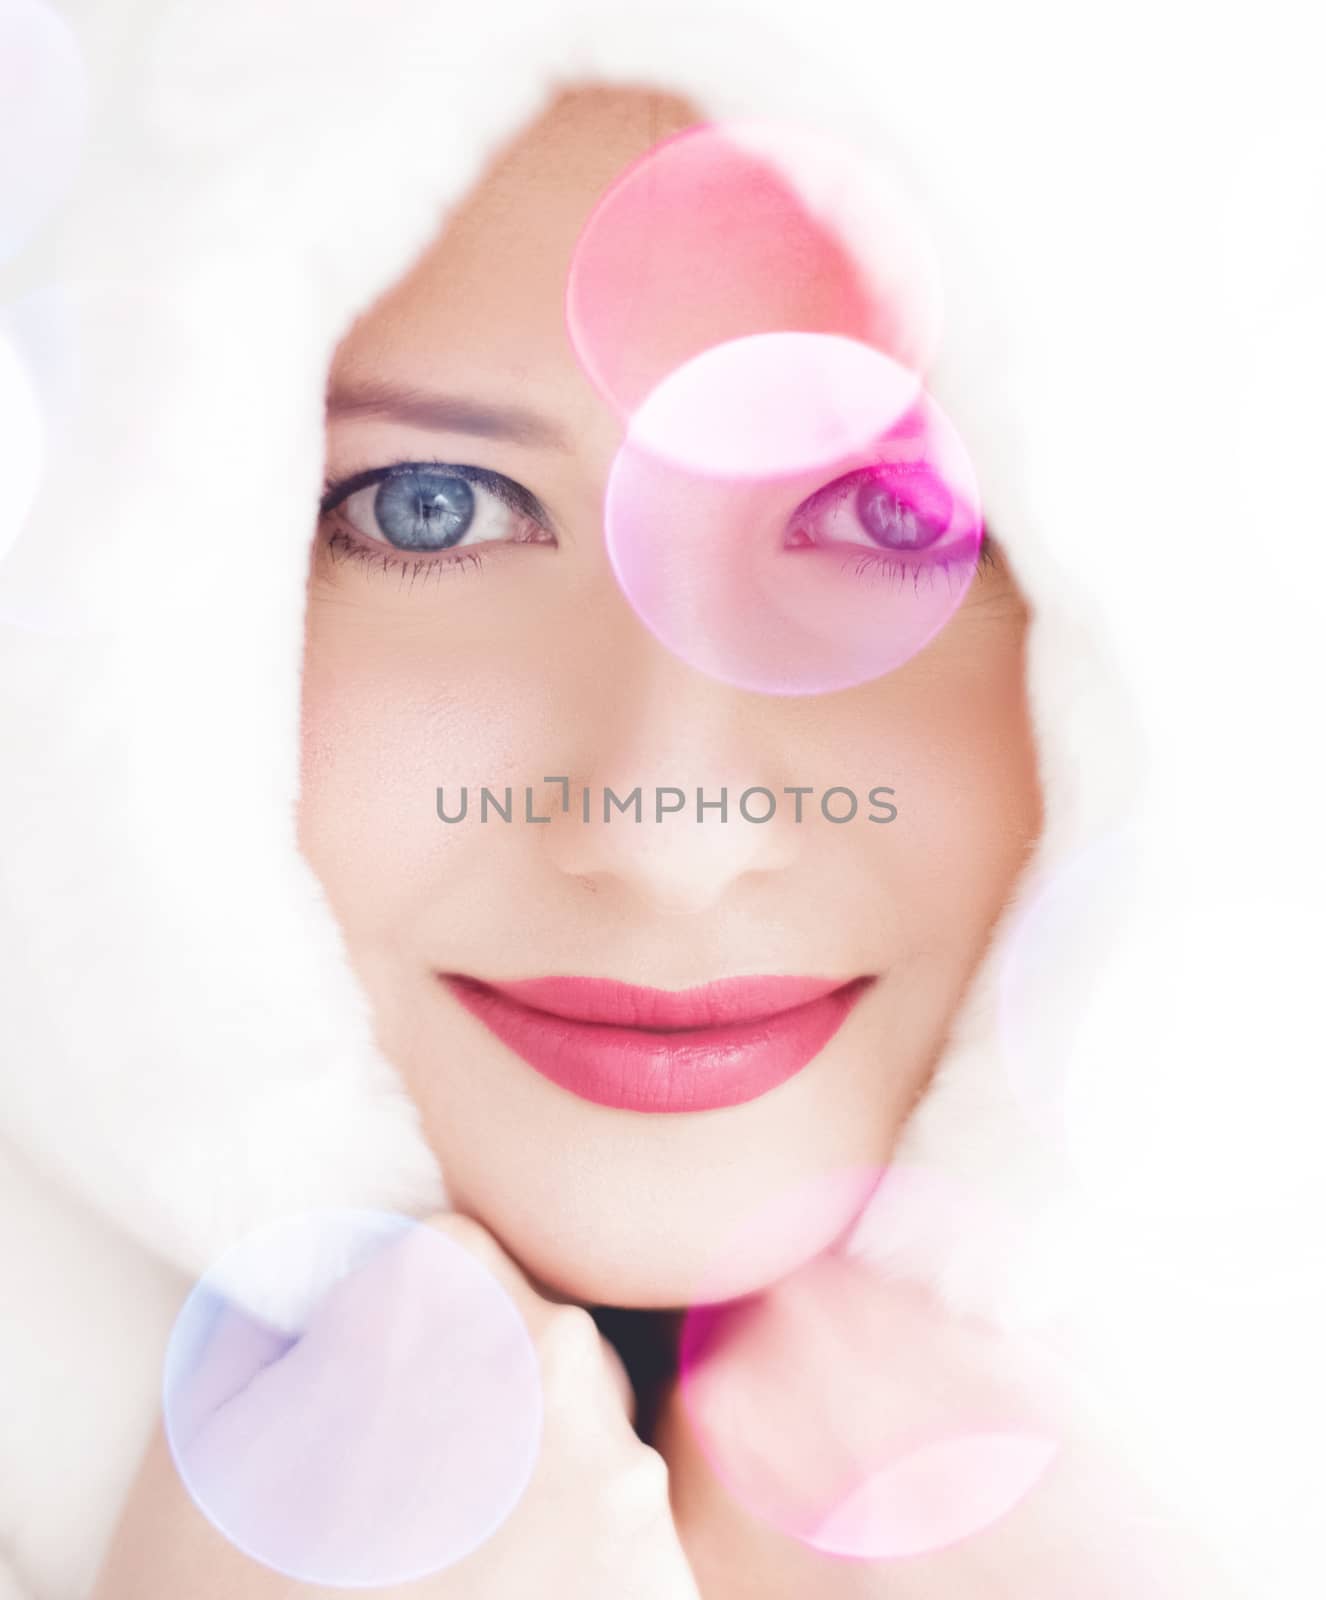 Merry Christmas portrait of smiling young woman wearing fluffy w by Anneleven